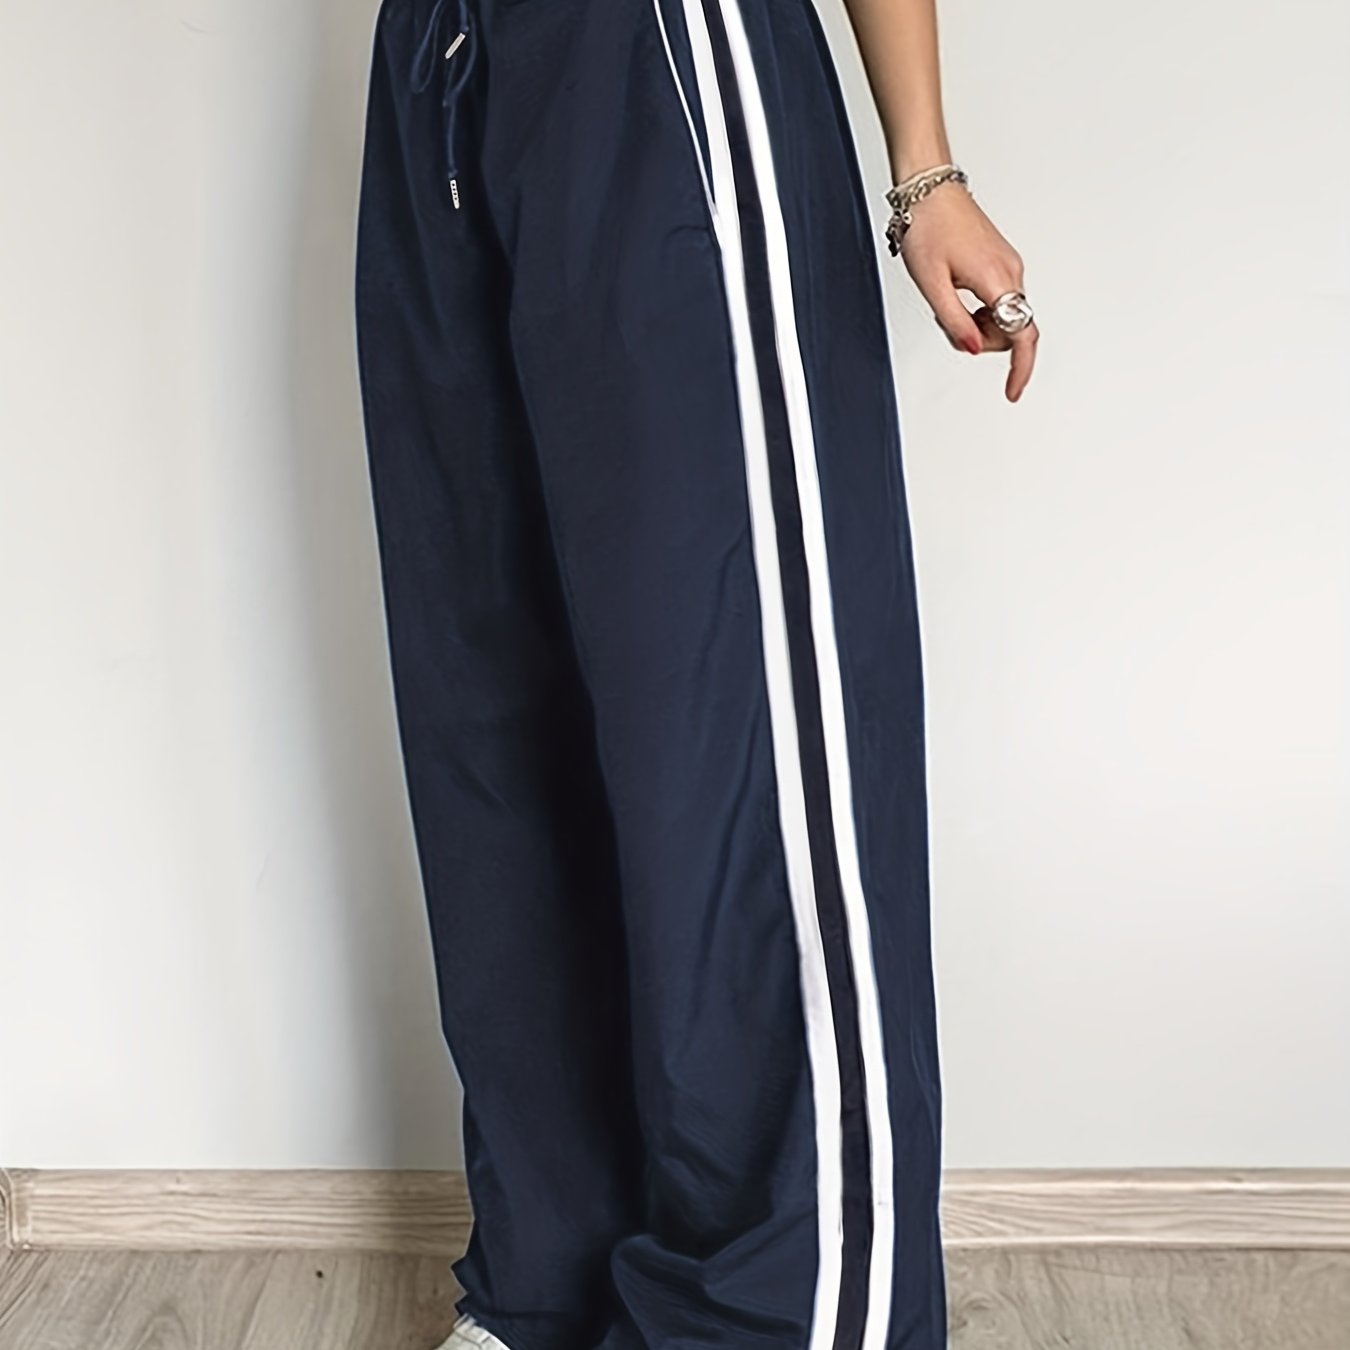 xieyinshe  Side Striped Wide Leg Pants, Casual Loose Drawstring Pants, Women's Clothing